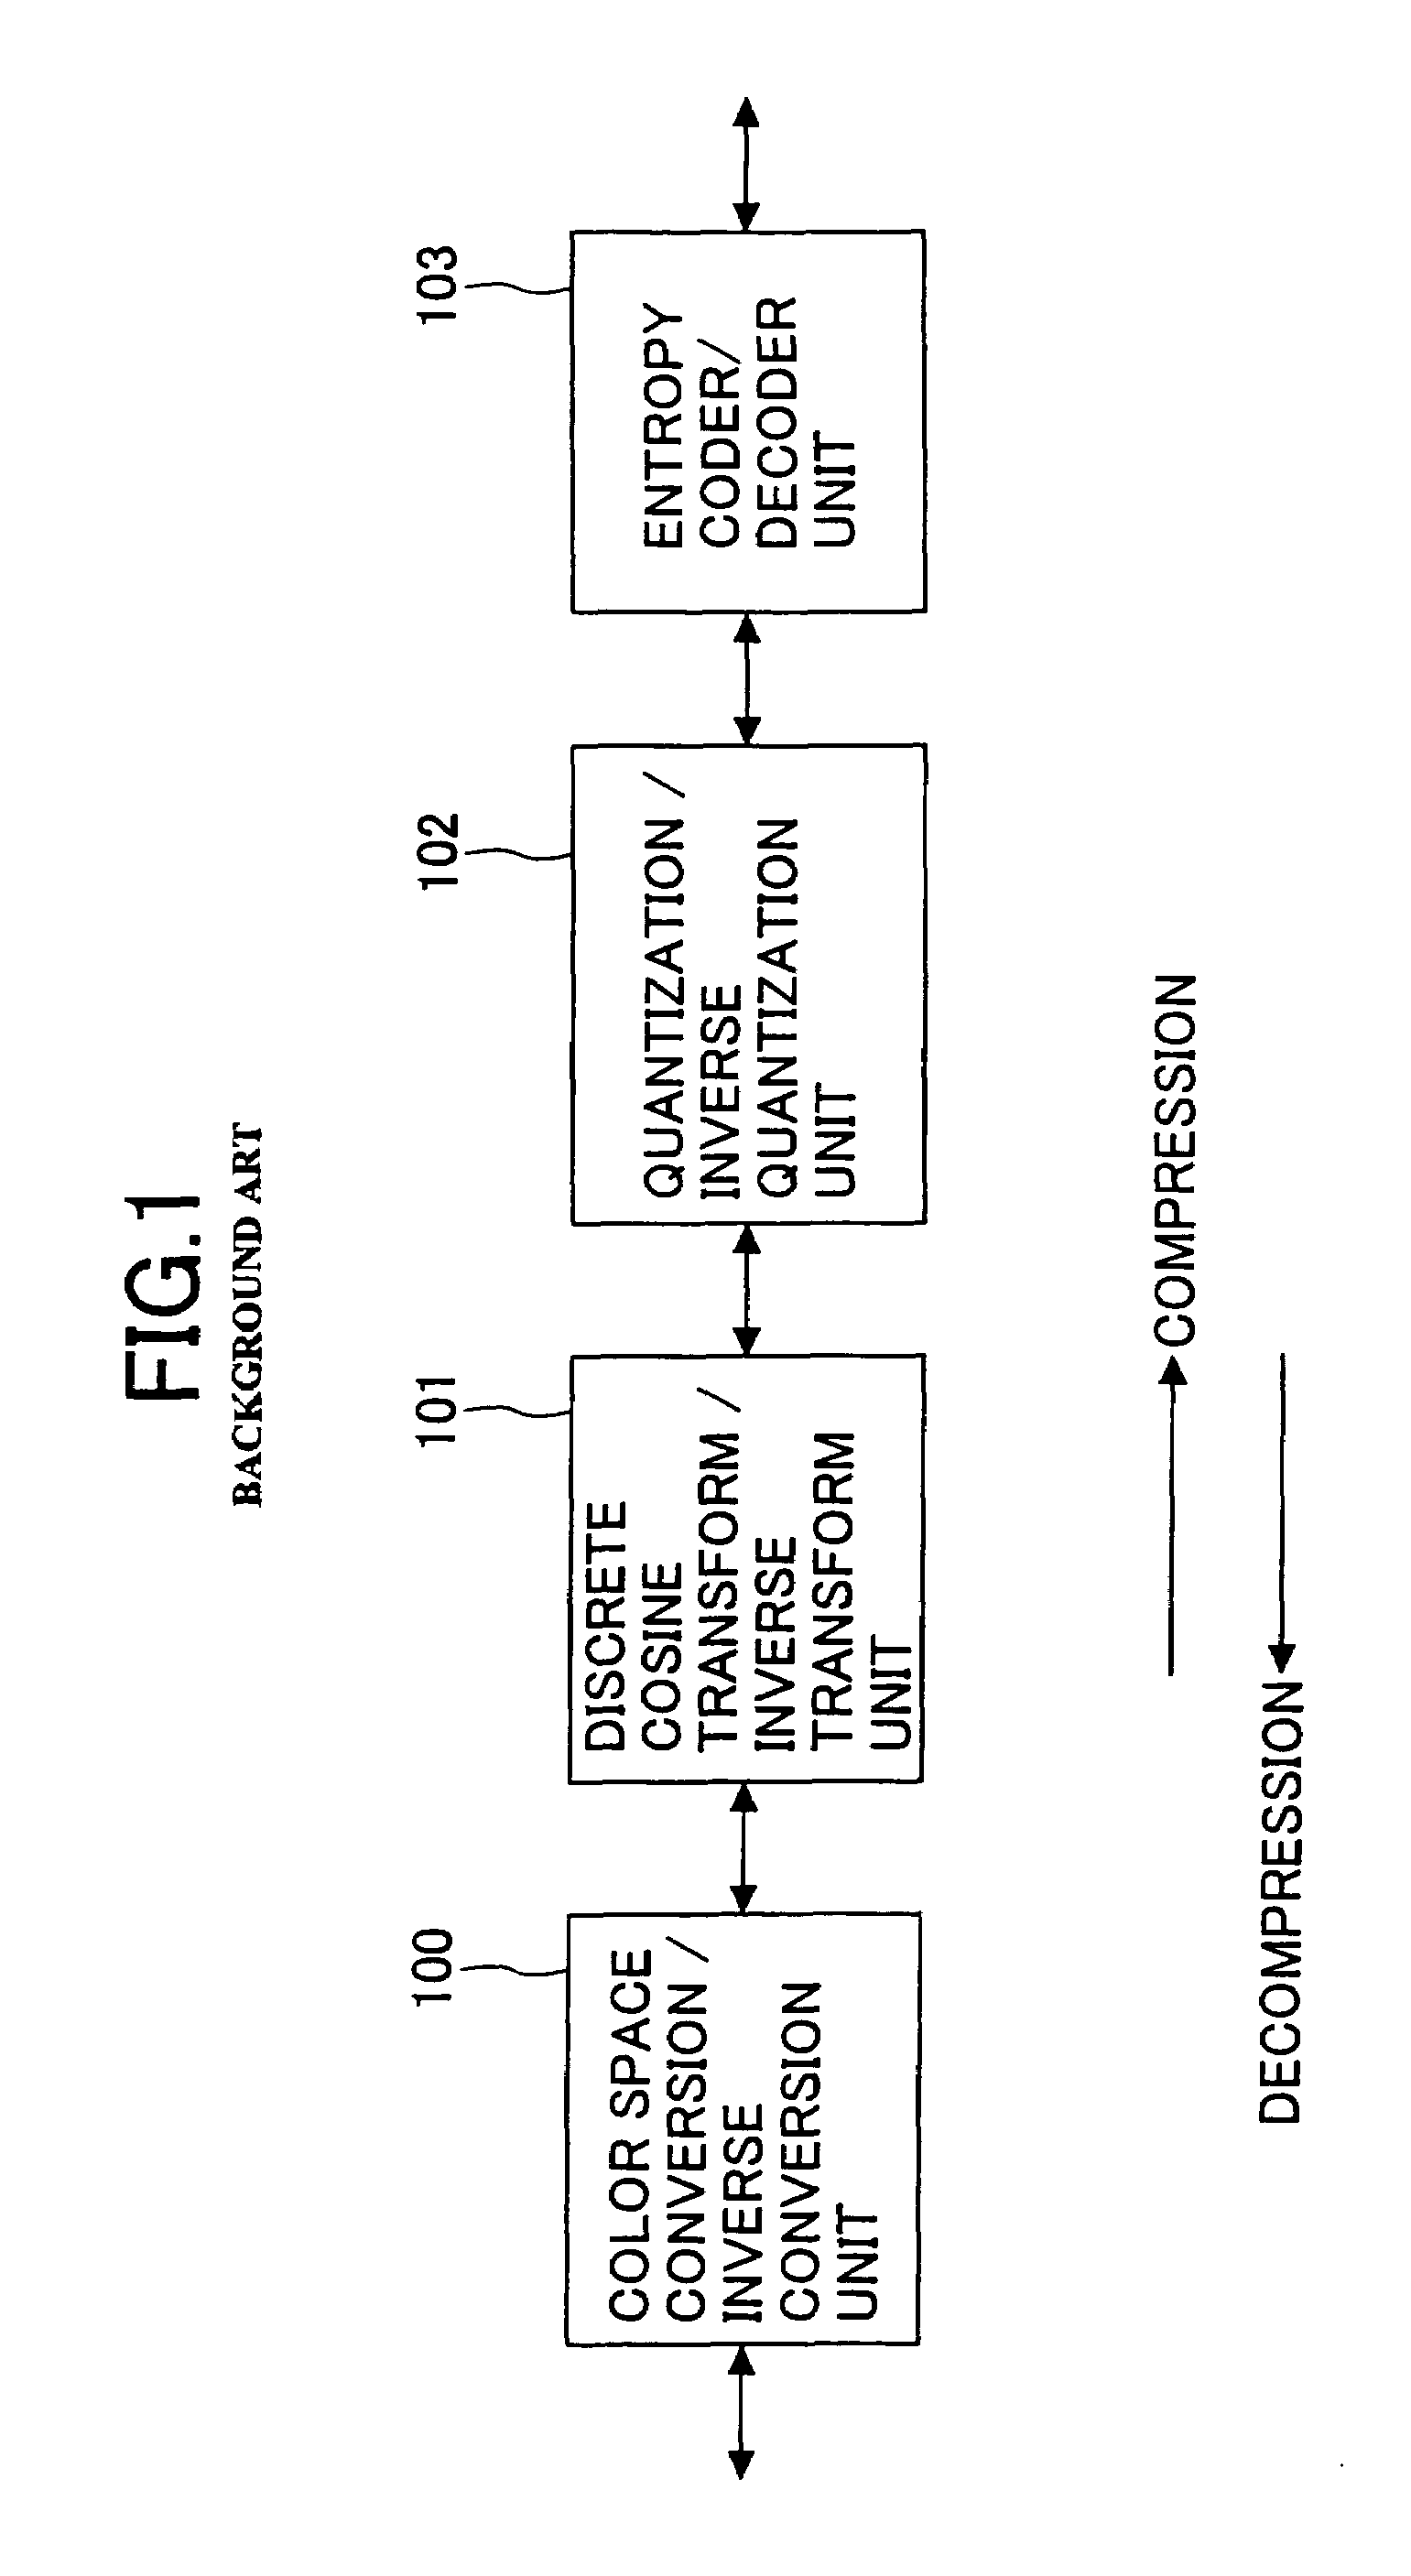 Image processing apparatus for compositing images